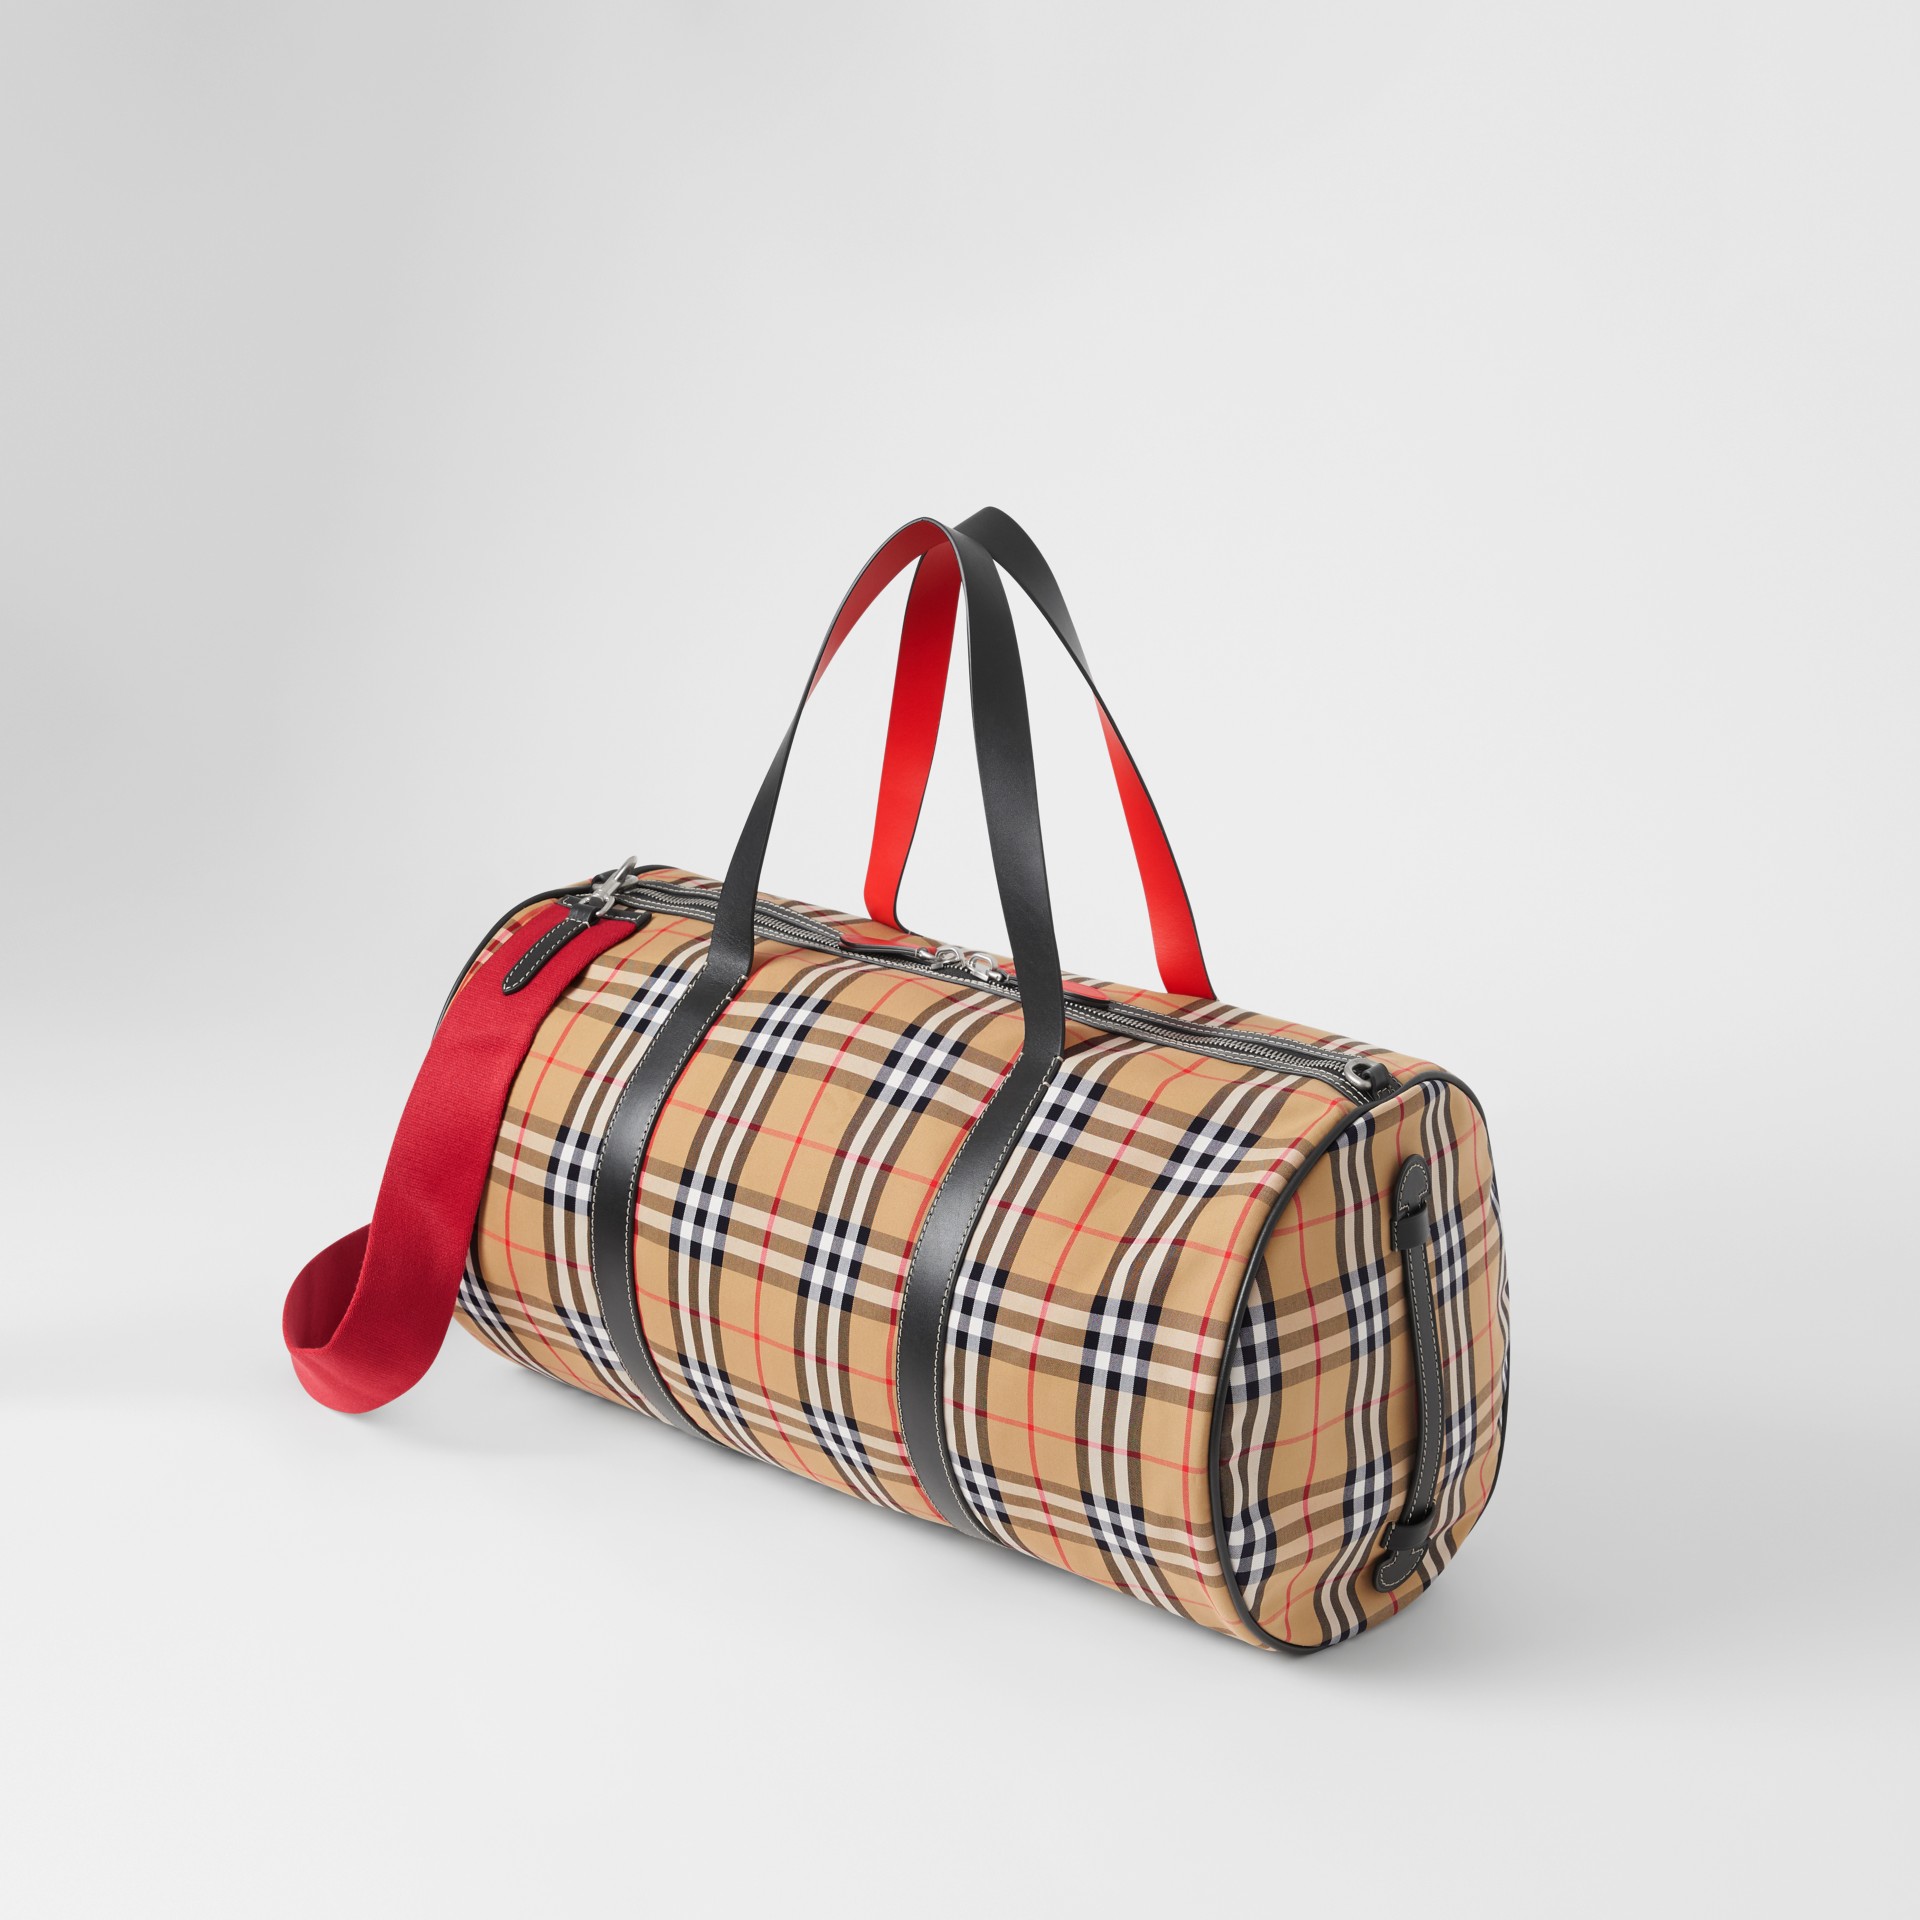 Large Vintage Check and Leather Barrel Bag in Military Red - Men | Burberry Australia